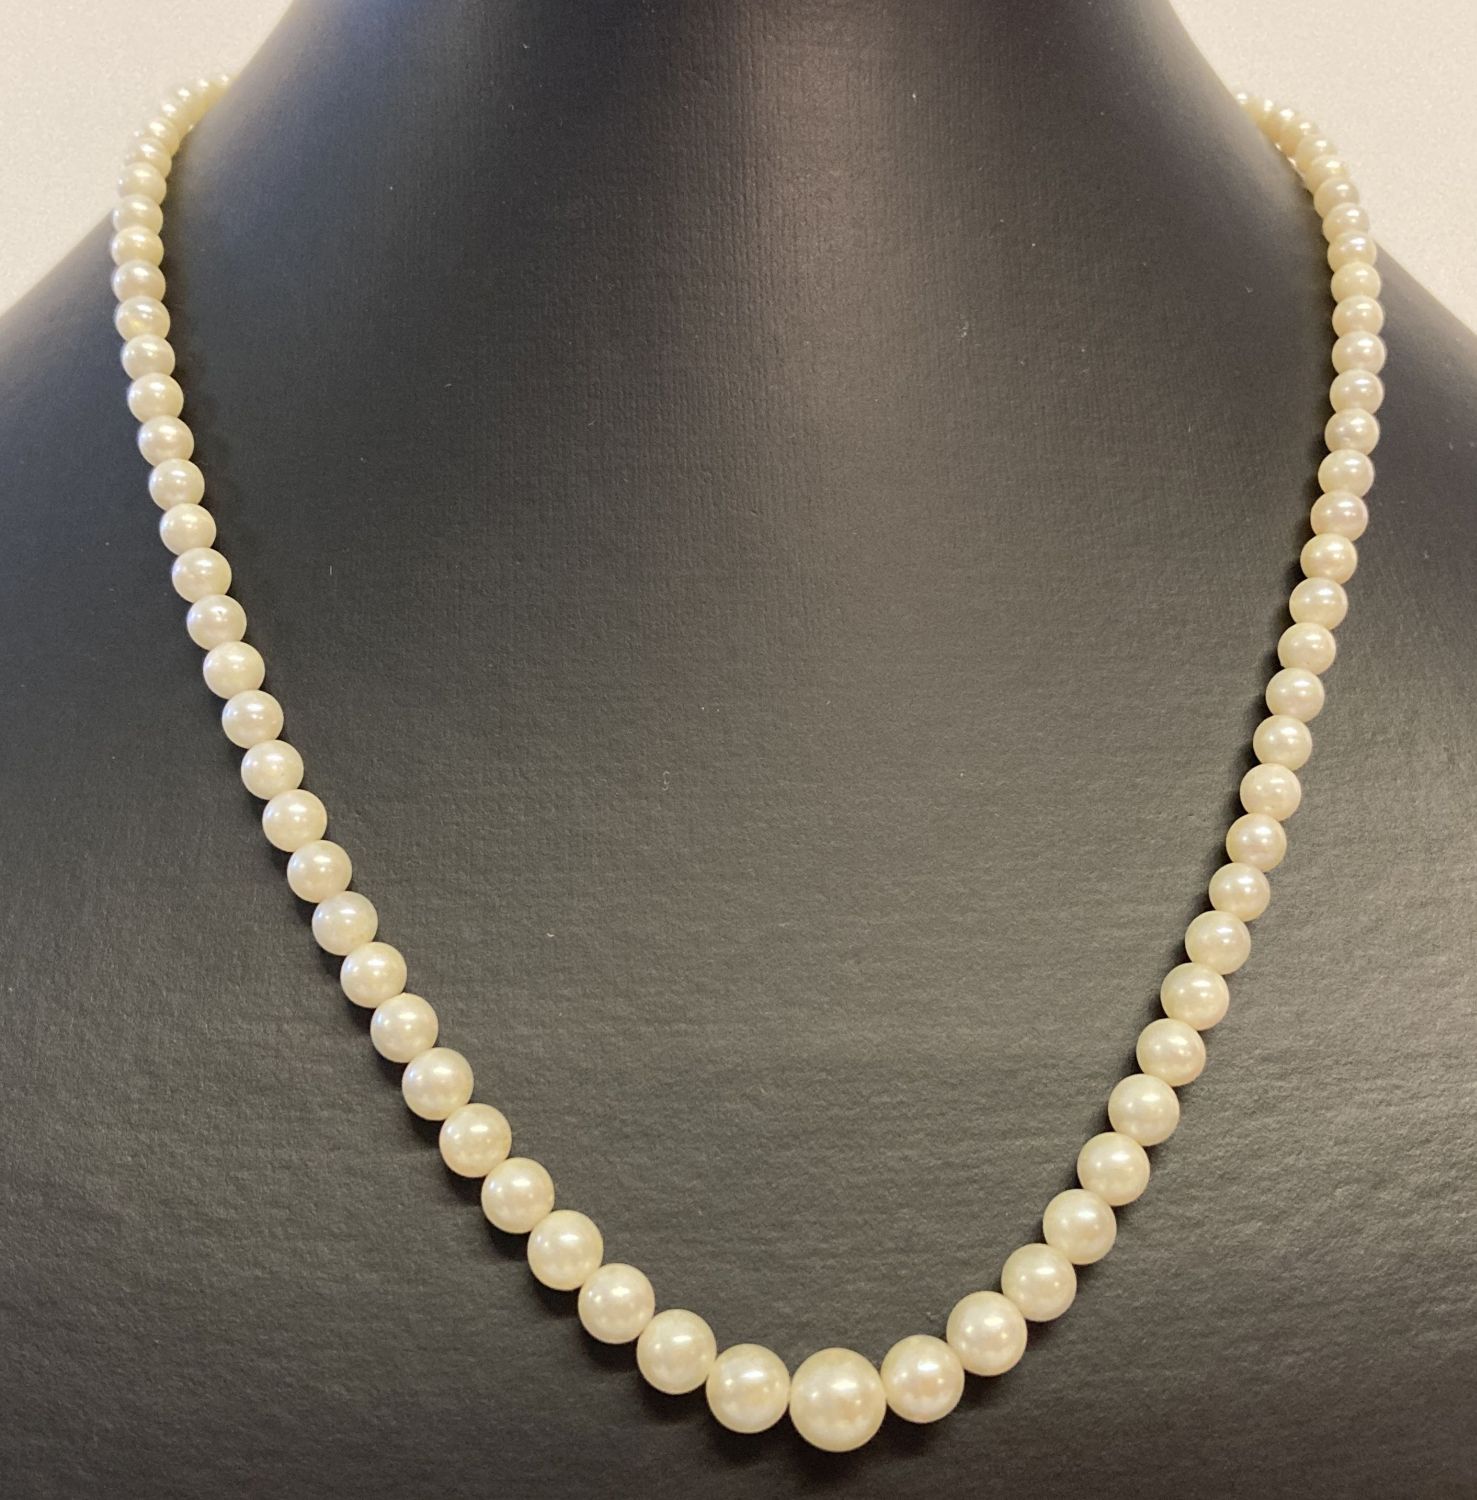 A vintage graduating cream pearl necklace with silver clasp.